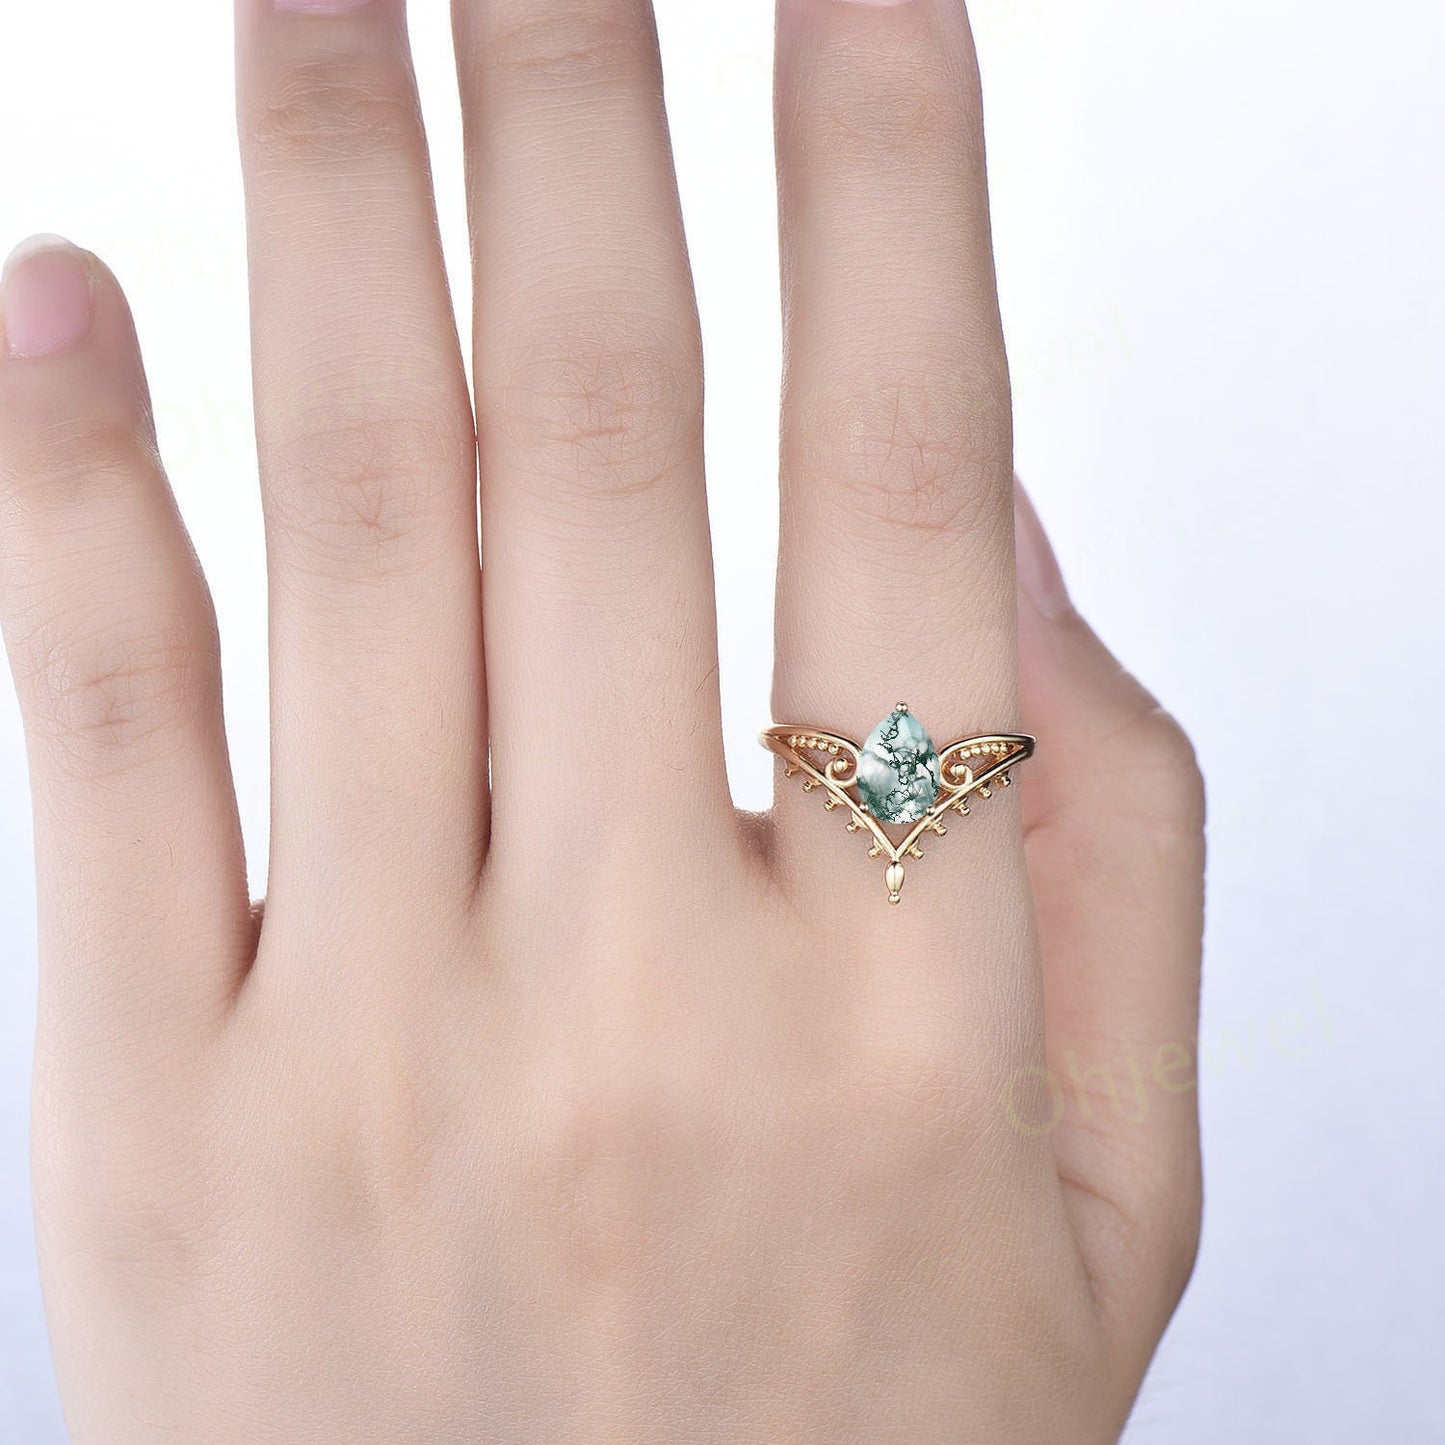 Vintage style pear shaped green moss agate ring unique split shank Solitaire engagement ring for women 14k yellow gold art deco promise ring